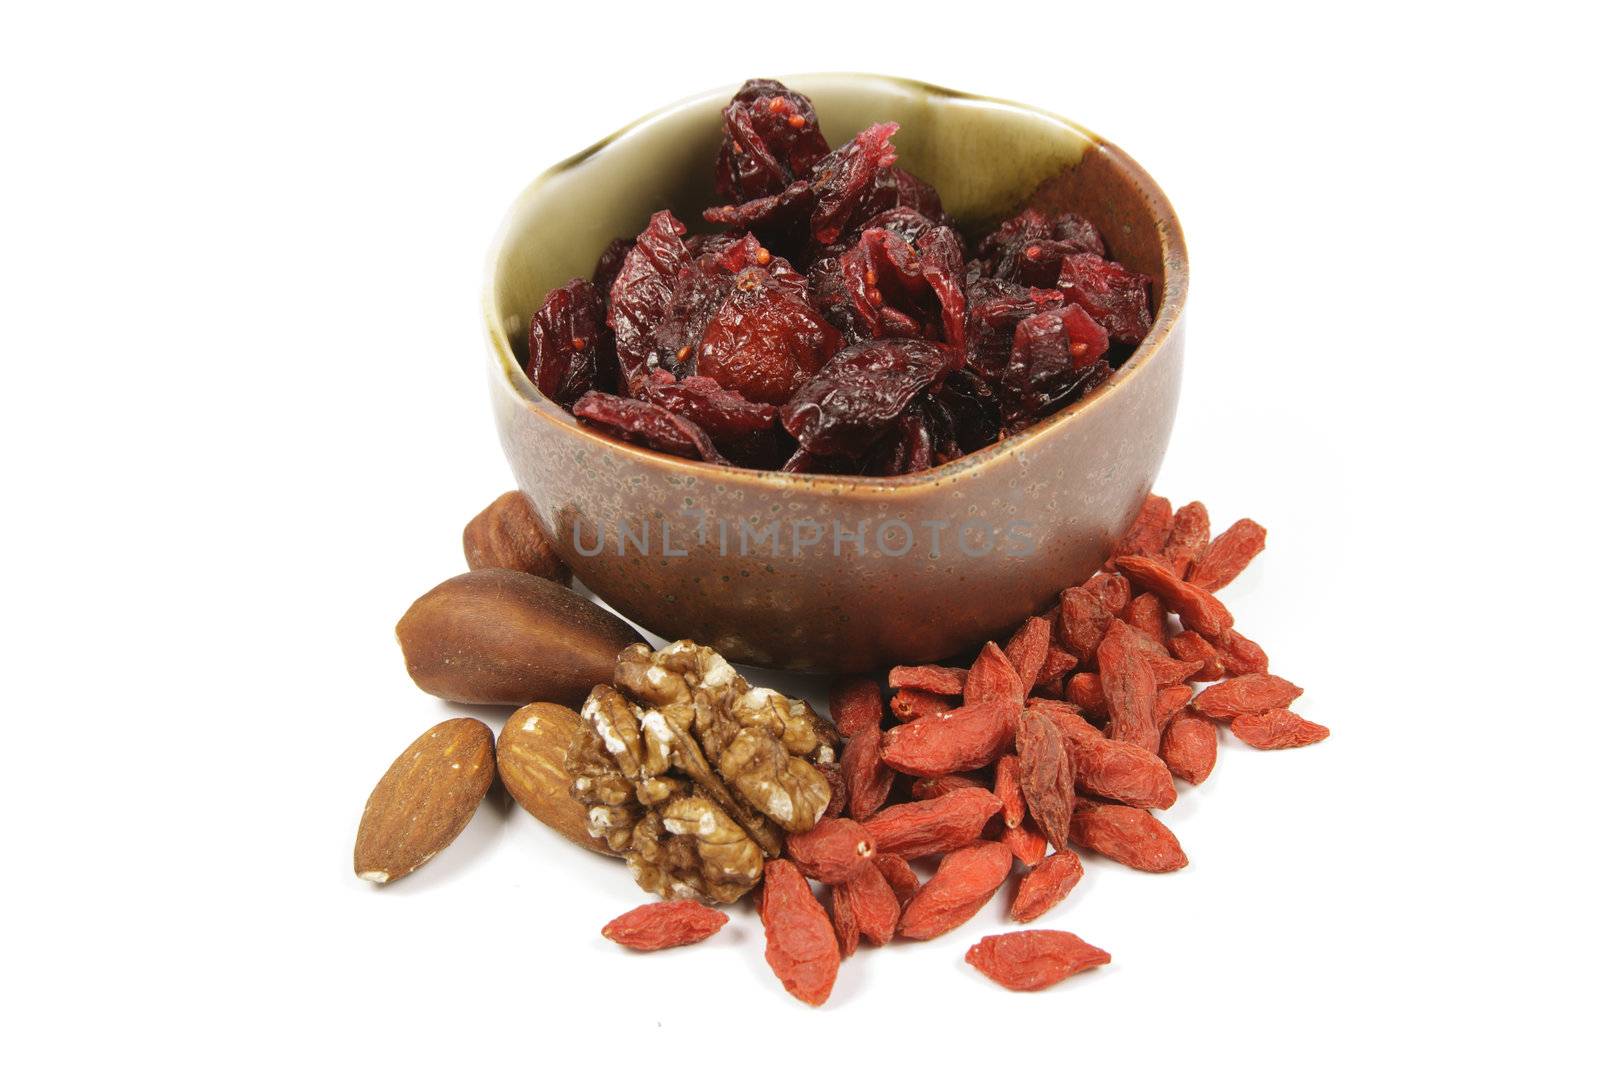 Red ripe dried cranberries in a small green and brown bowl with mixed nuts and goji berries on a reflective white background